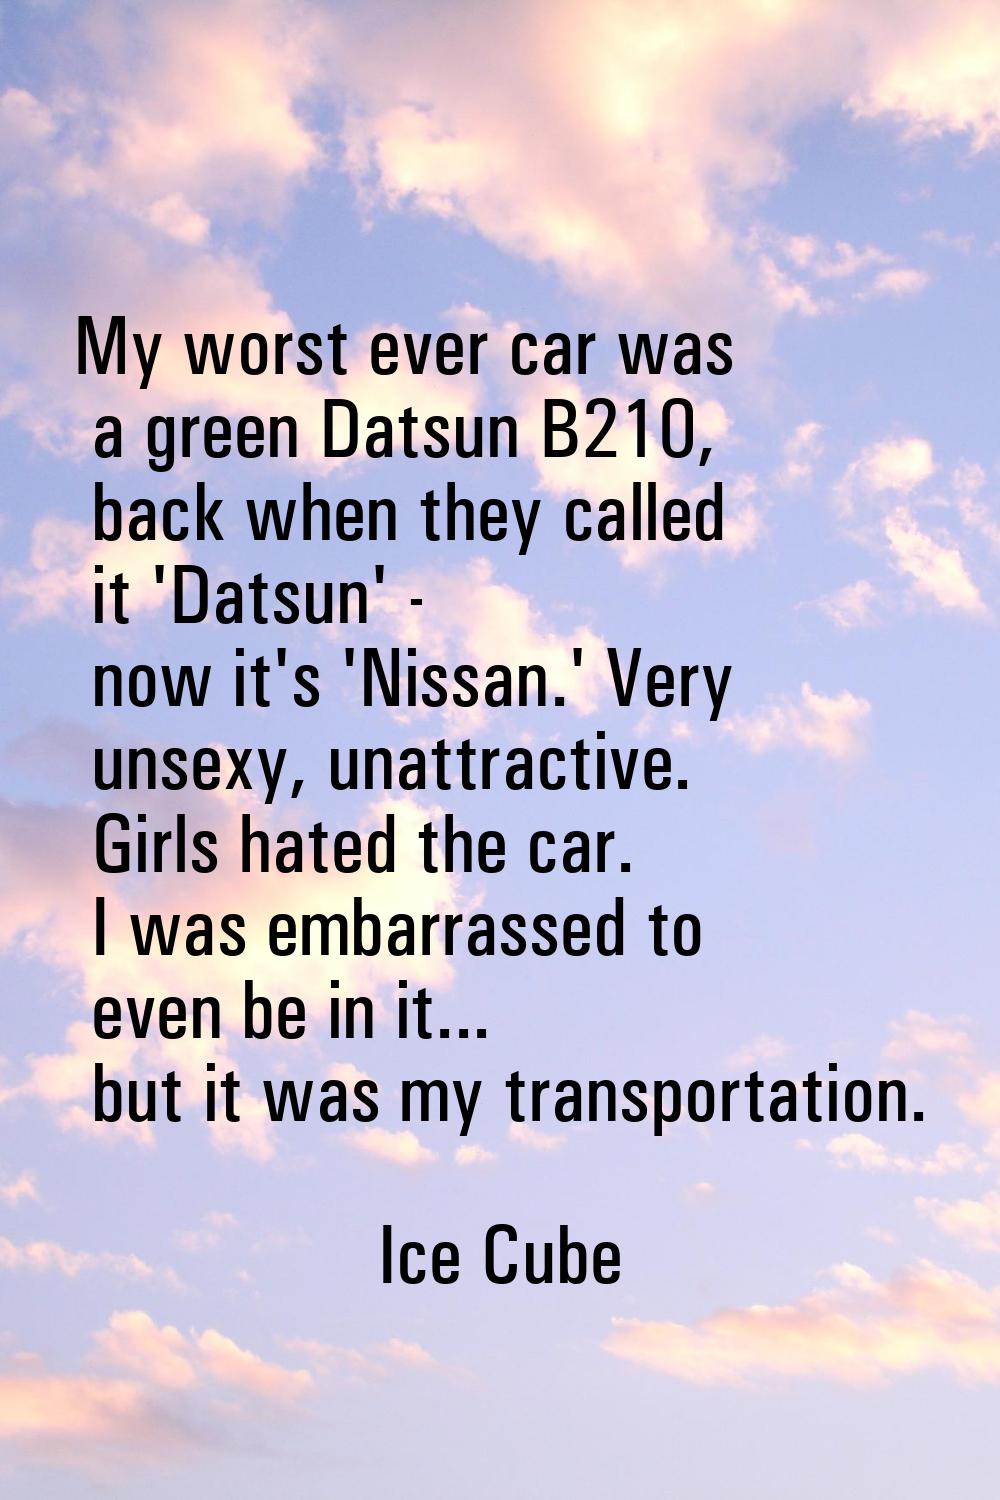 My worst ever car was a green Datsun B210, back when they called it 'Datsun' - now it's 'Nissan.' V